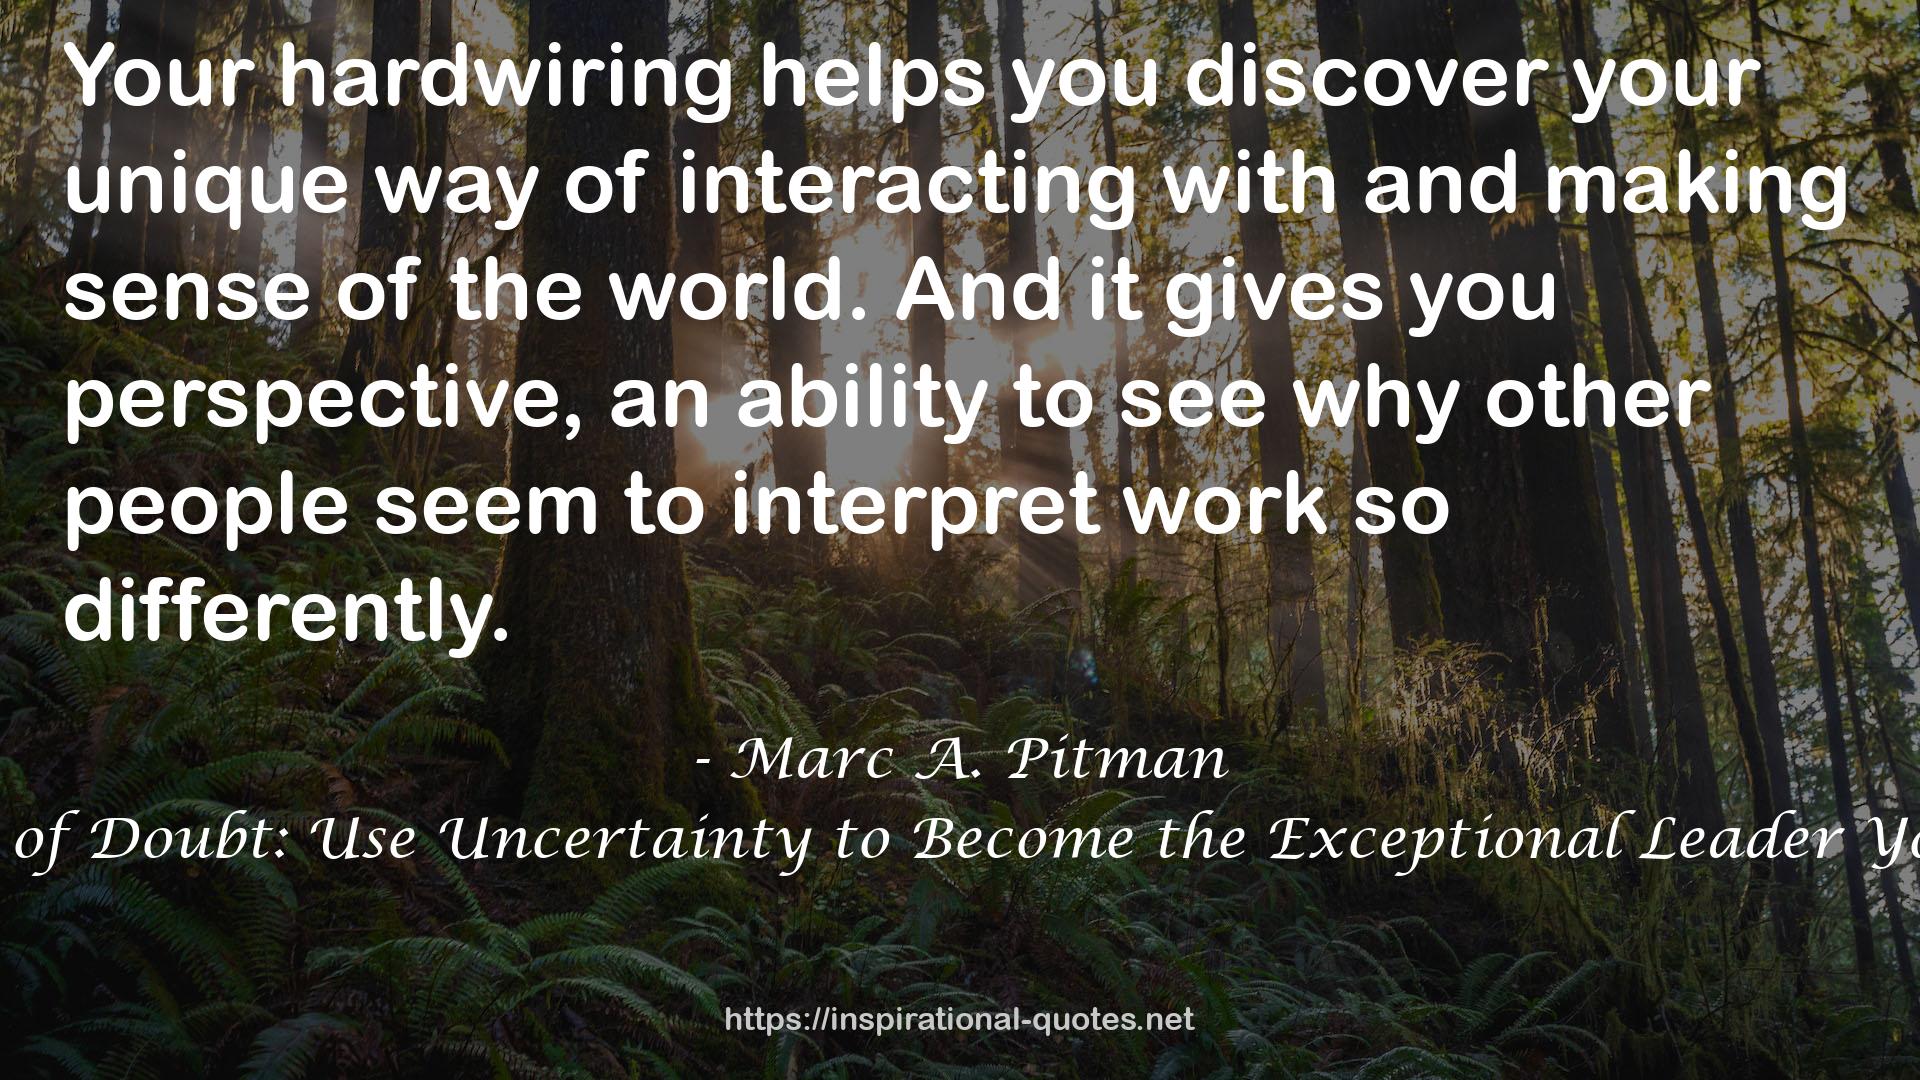 Marc A. Pitman QUOTES